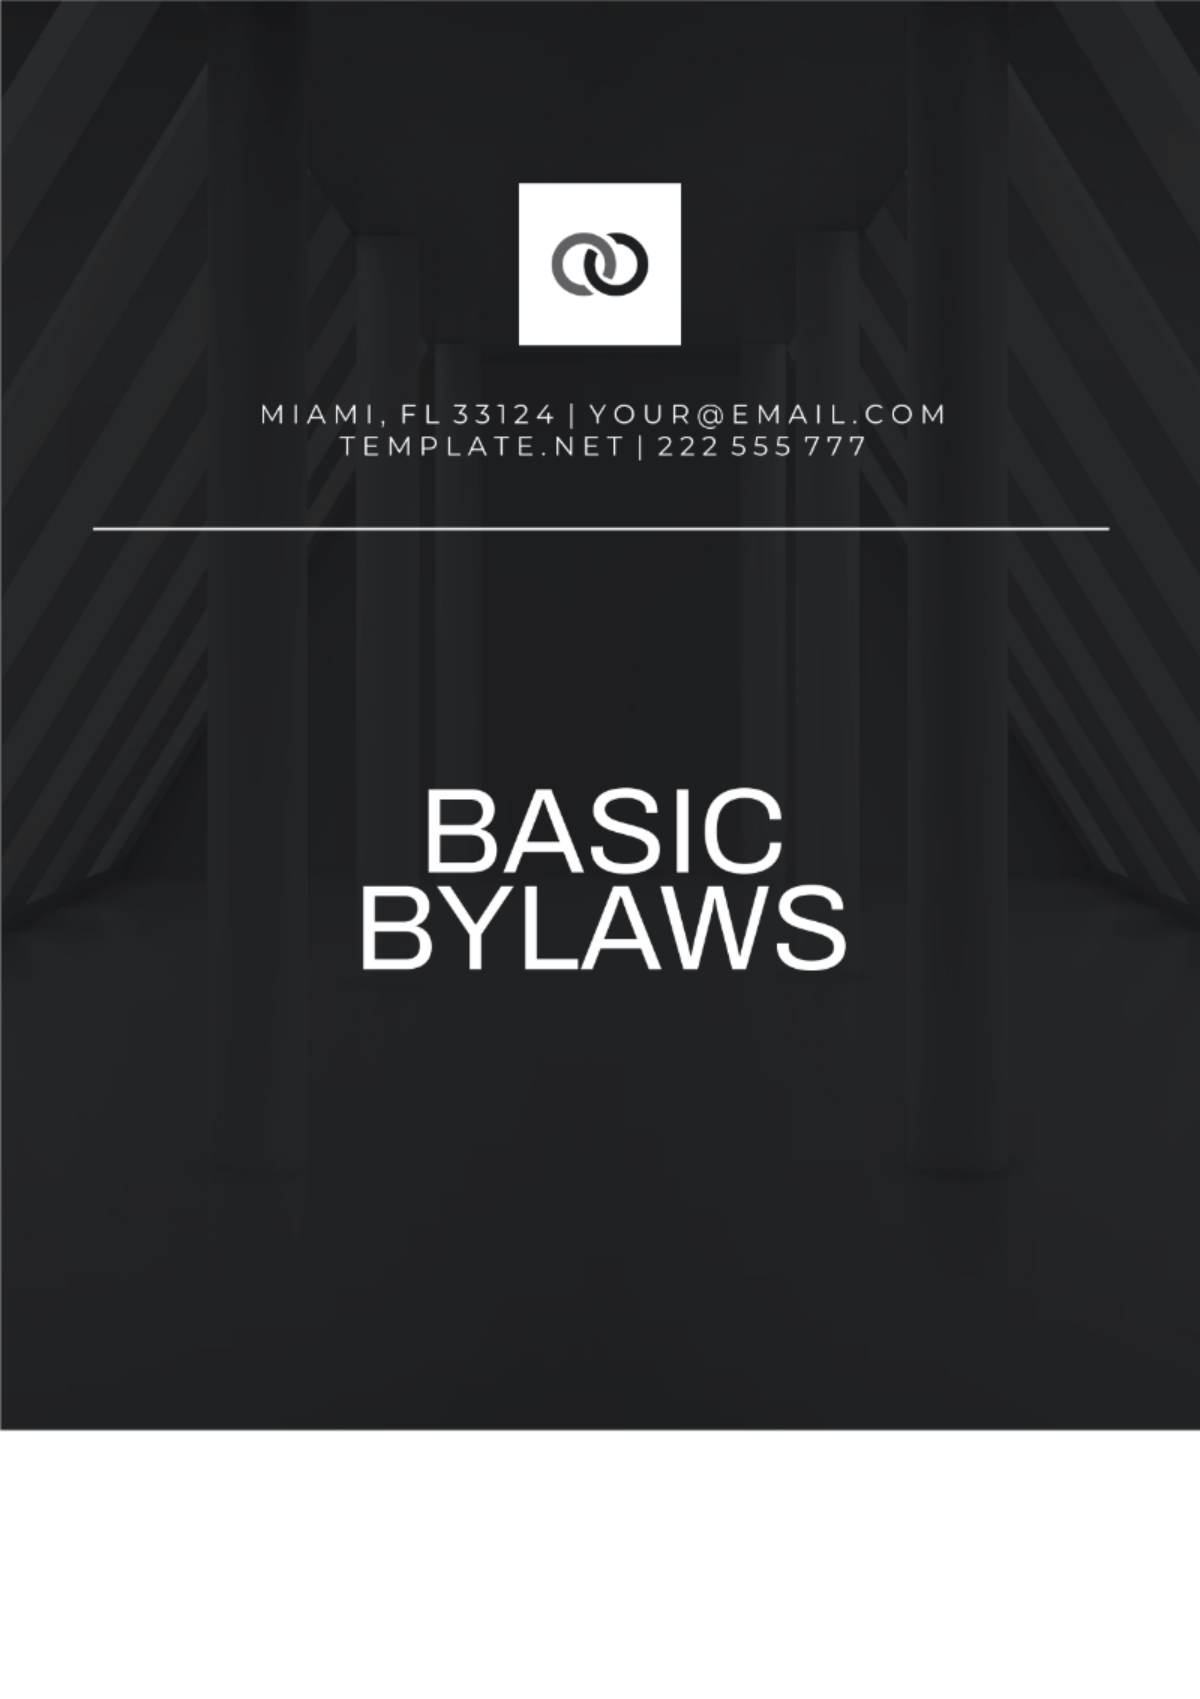 Basic Bylaws Template